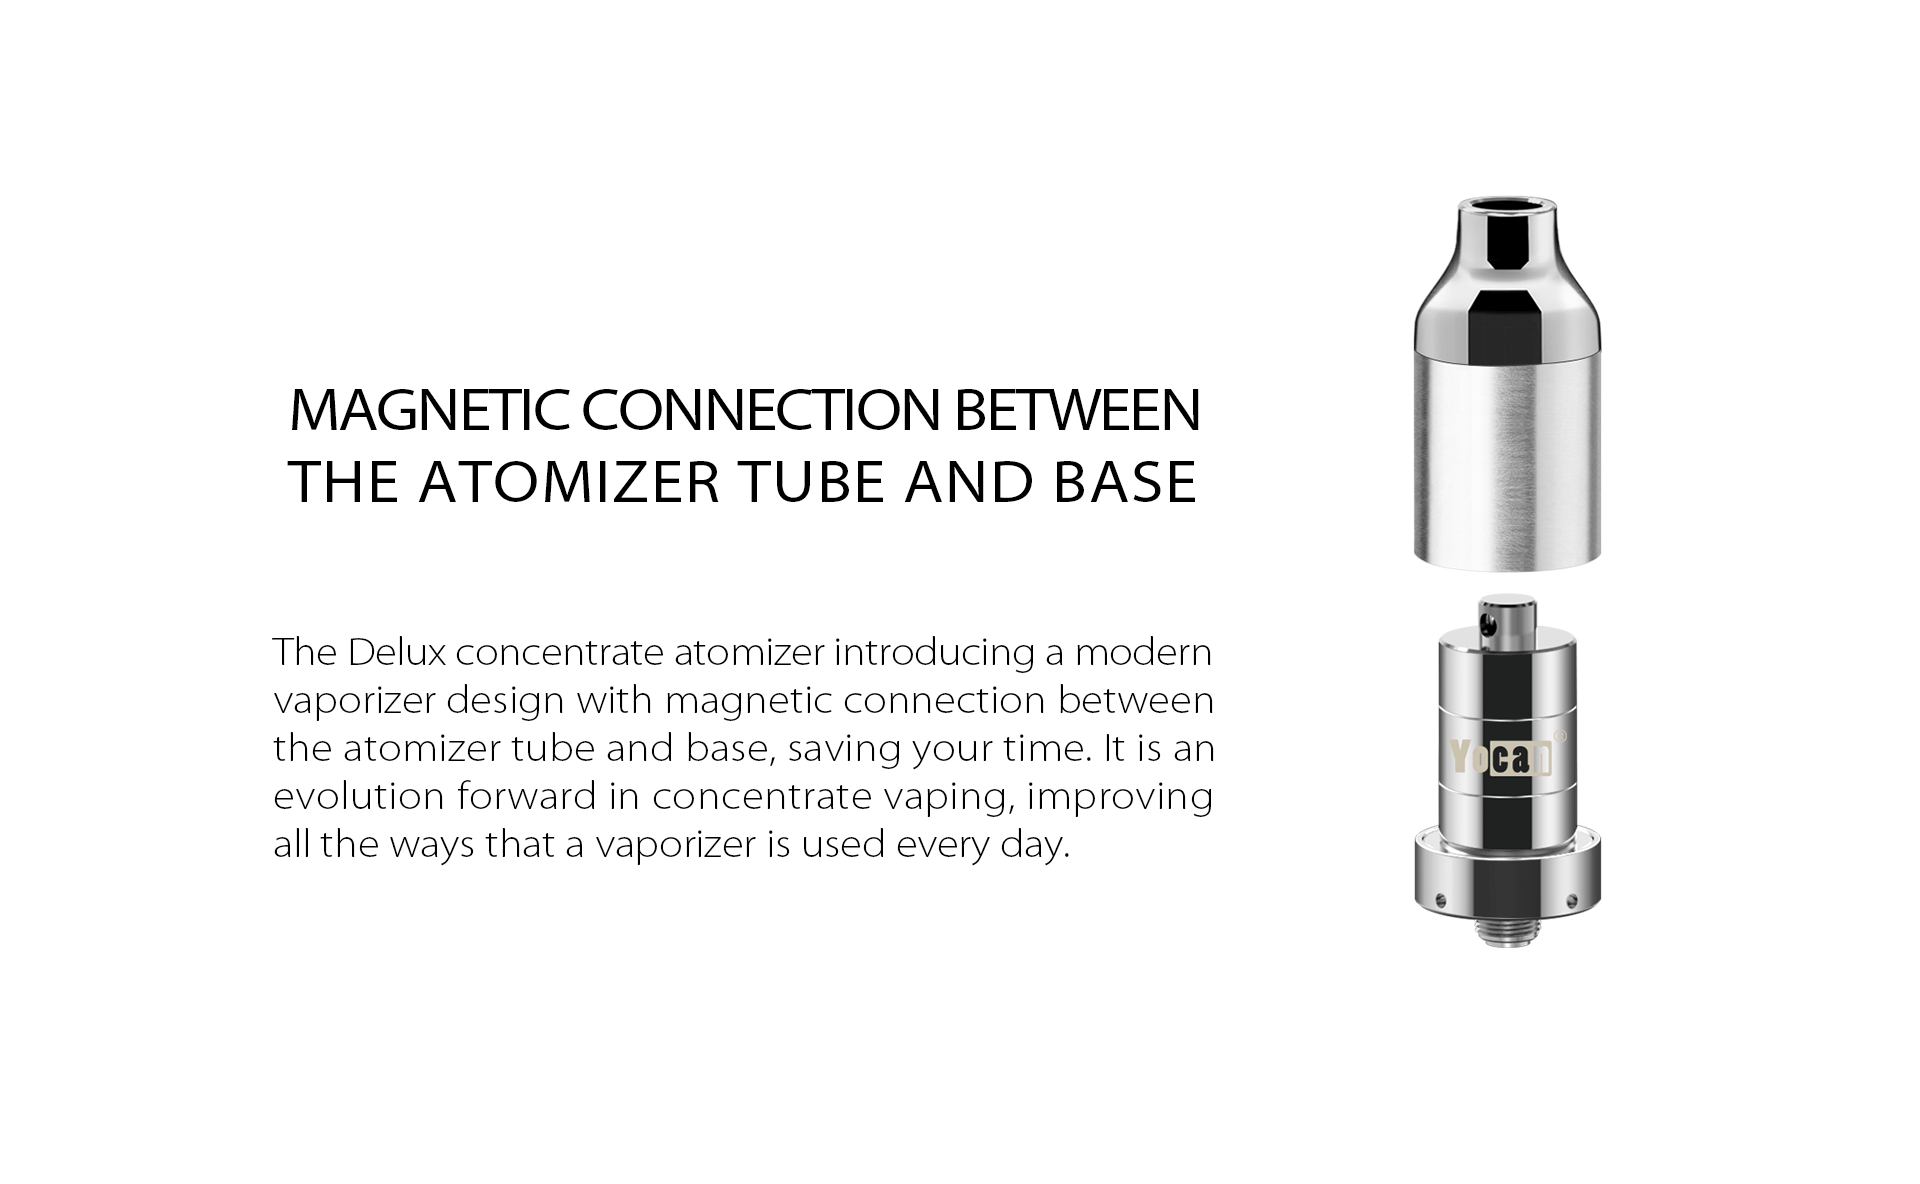 Magnetic connection between the Yocan DeLux atomizer tube and Yocan DeLux base.